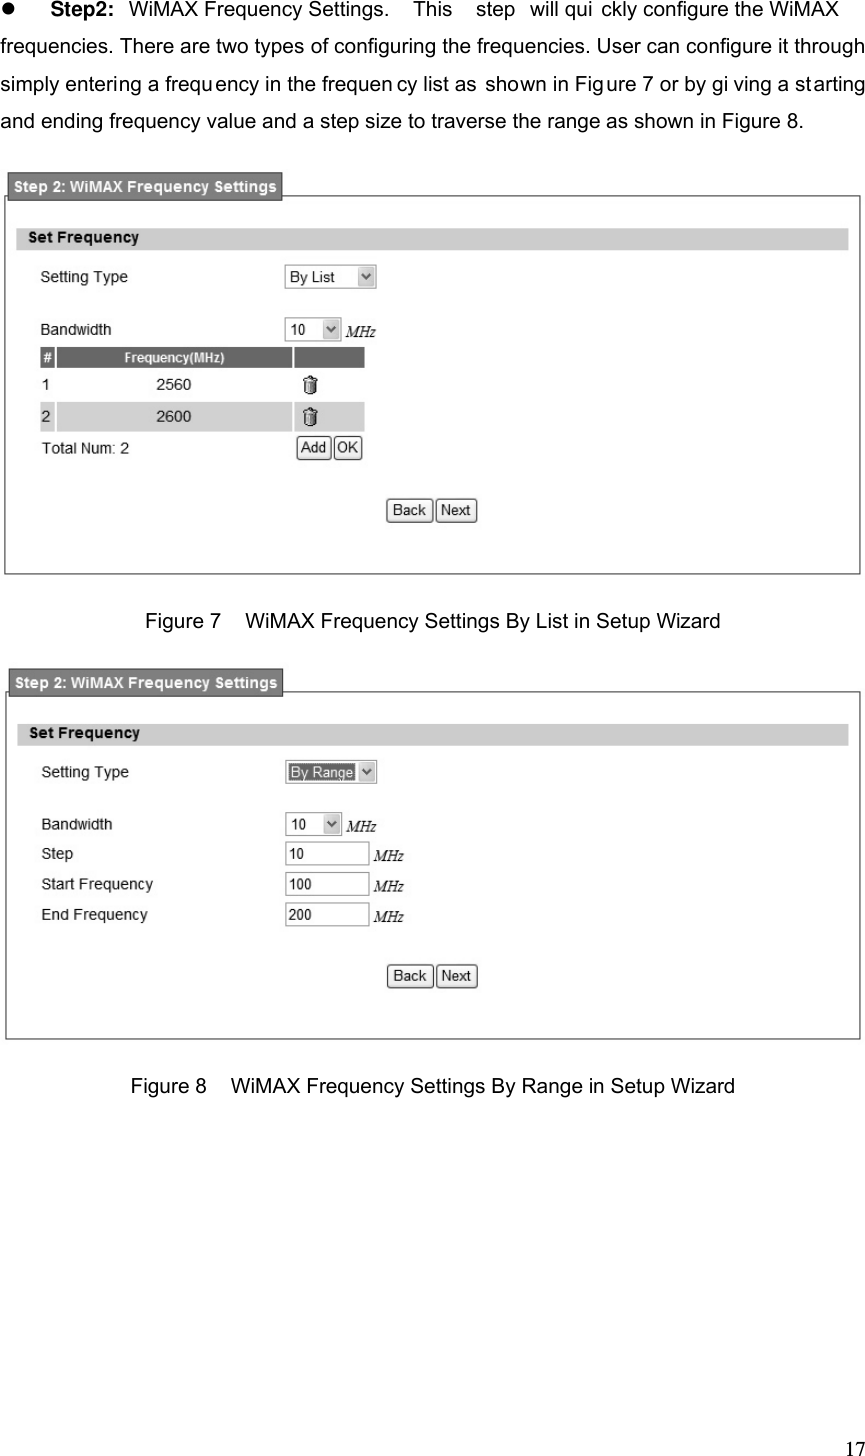  17 Step2:  WiMAX Frequency Settings.  This  step will qui ckly configure the WiMAX  frequencies. There are two types of configuring the frequencies. User can configure it through simply entering a frequ ency in the frequen cy list as  shown in Fig ure 7 or by gi ving a starting and ending frequency value and a step size to traverse the range as shown in Figure 8.  Figure 7  WiMAX Frequency Settings By List in Setup Wizard  Figure 8  WiMAX Frequency Settings By Range in Setup Wizard 